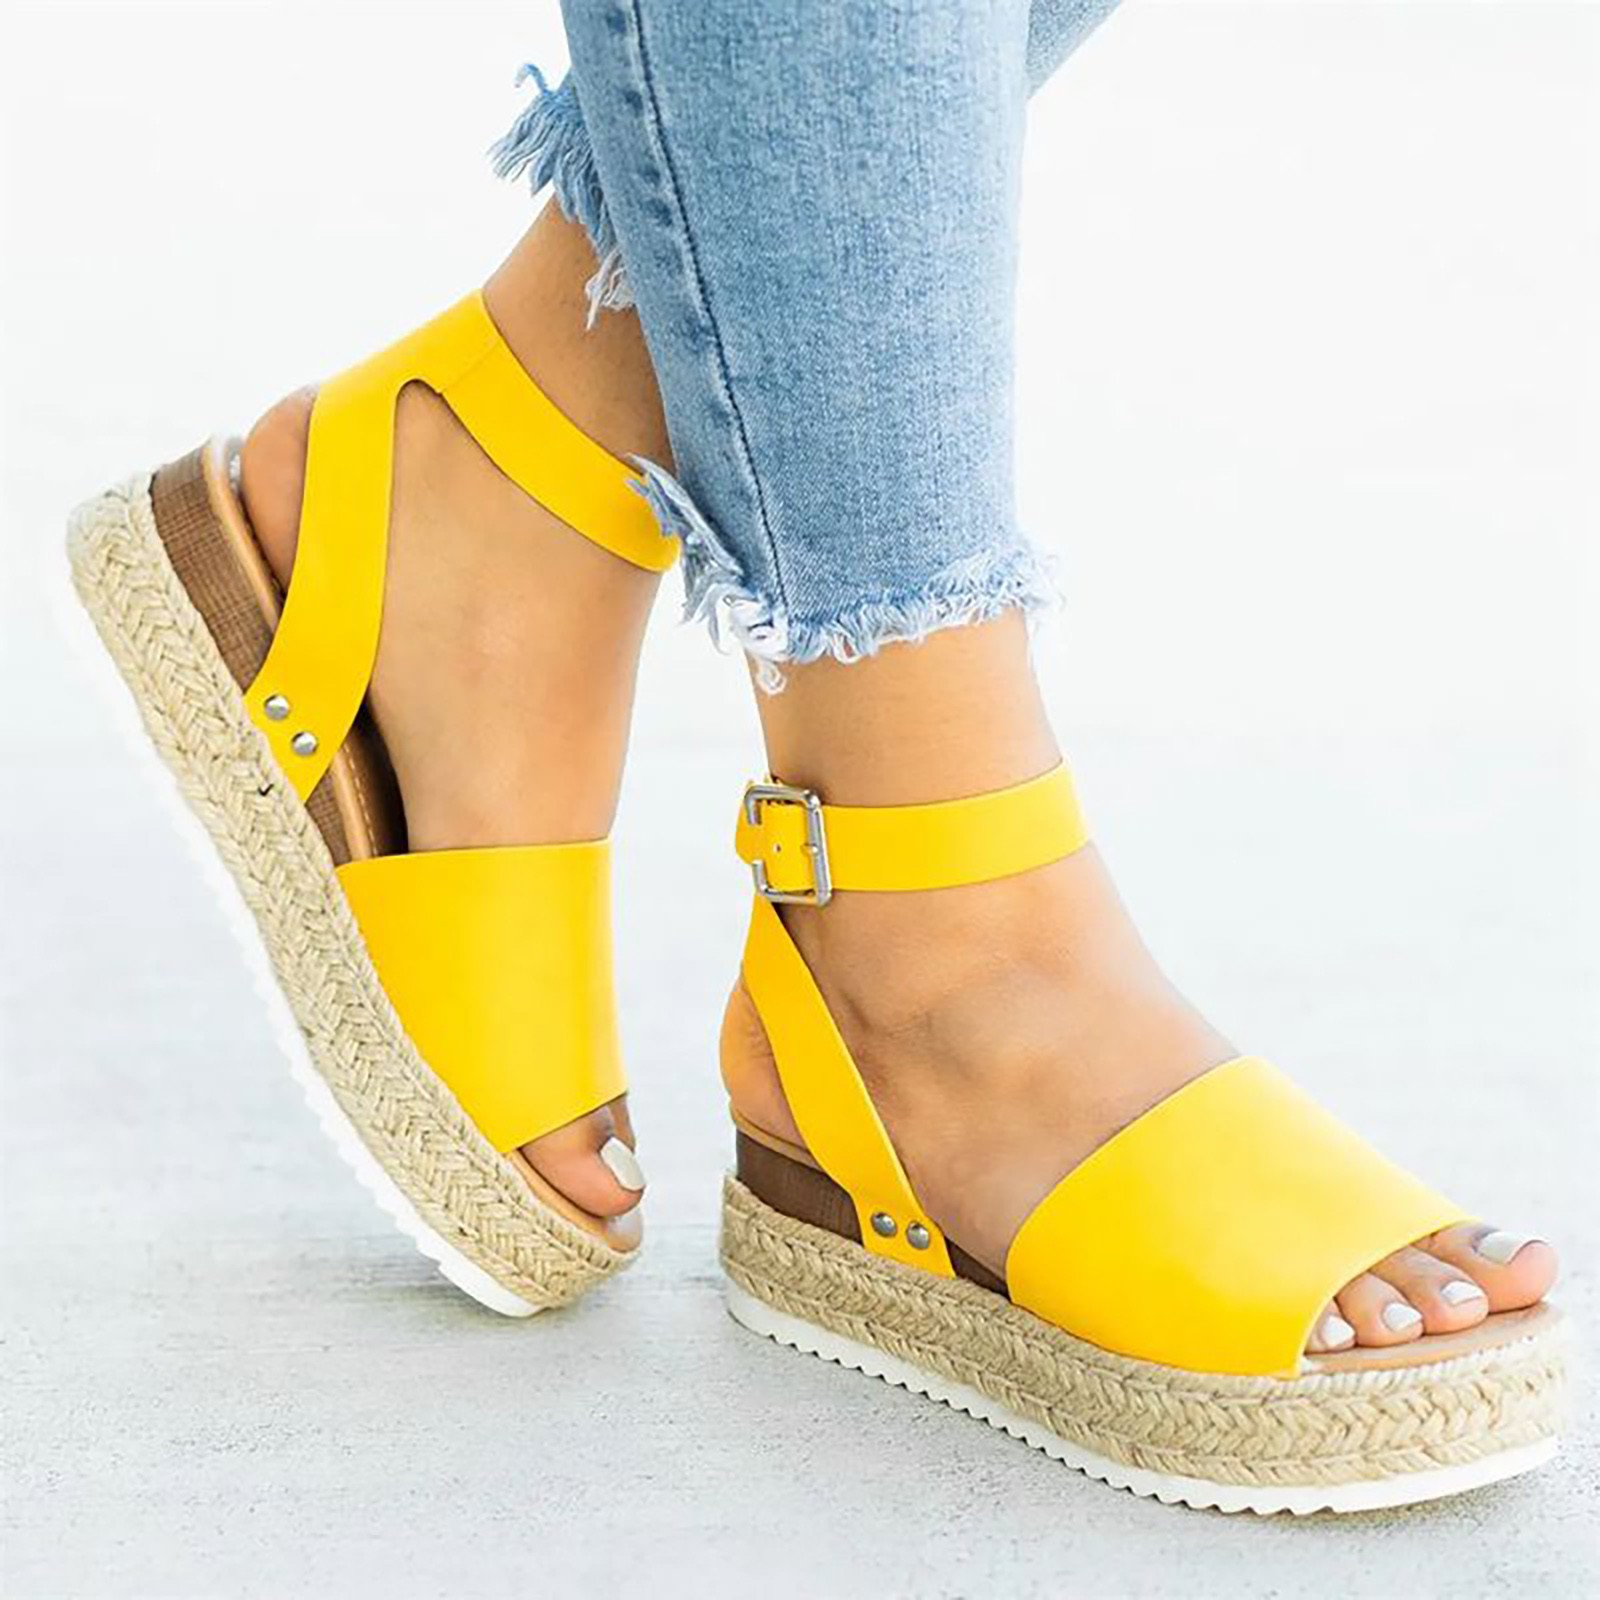 Azrian Woman Summer Sandals Open toe Casual Platform Wedge Shoes Casual Canvas Shoes - image 2 of 5